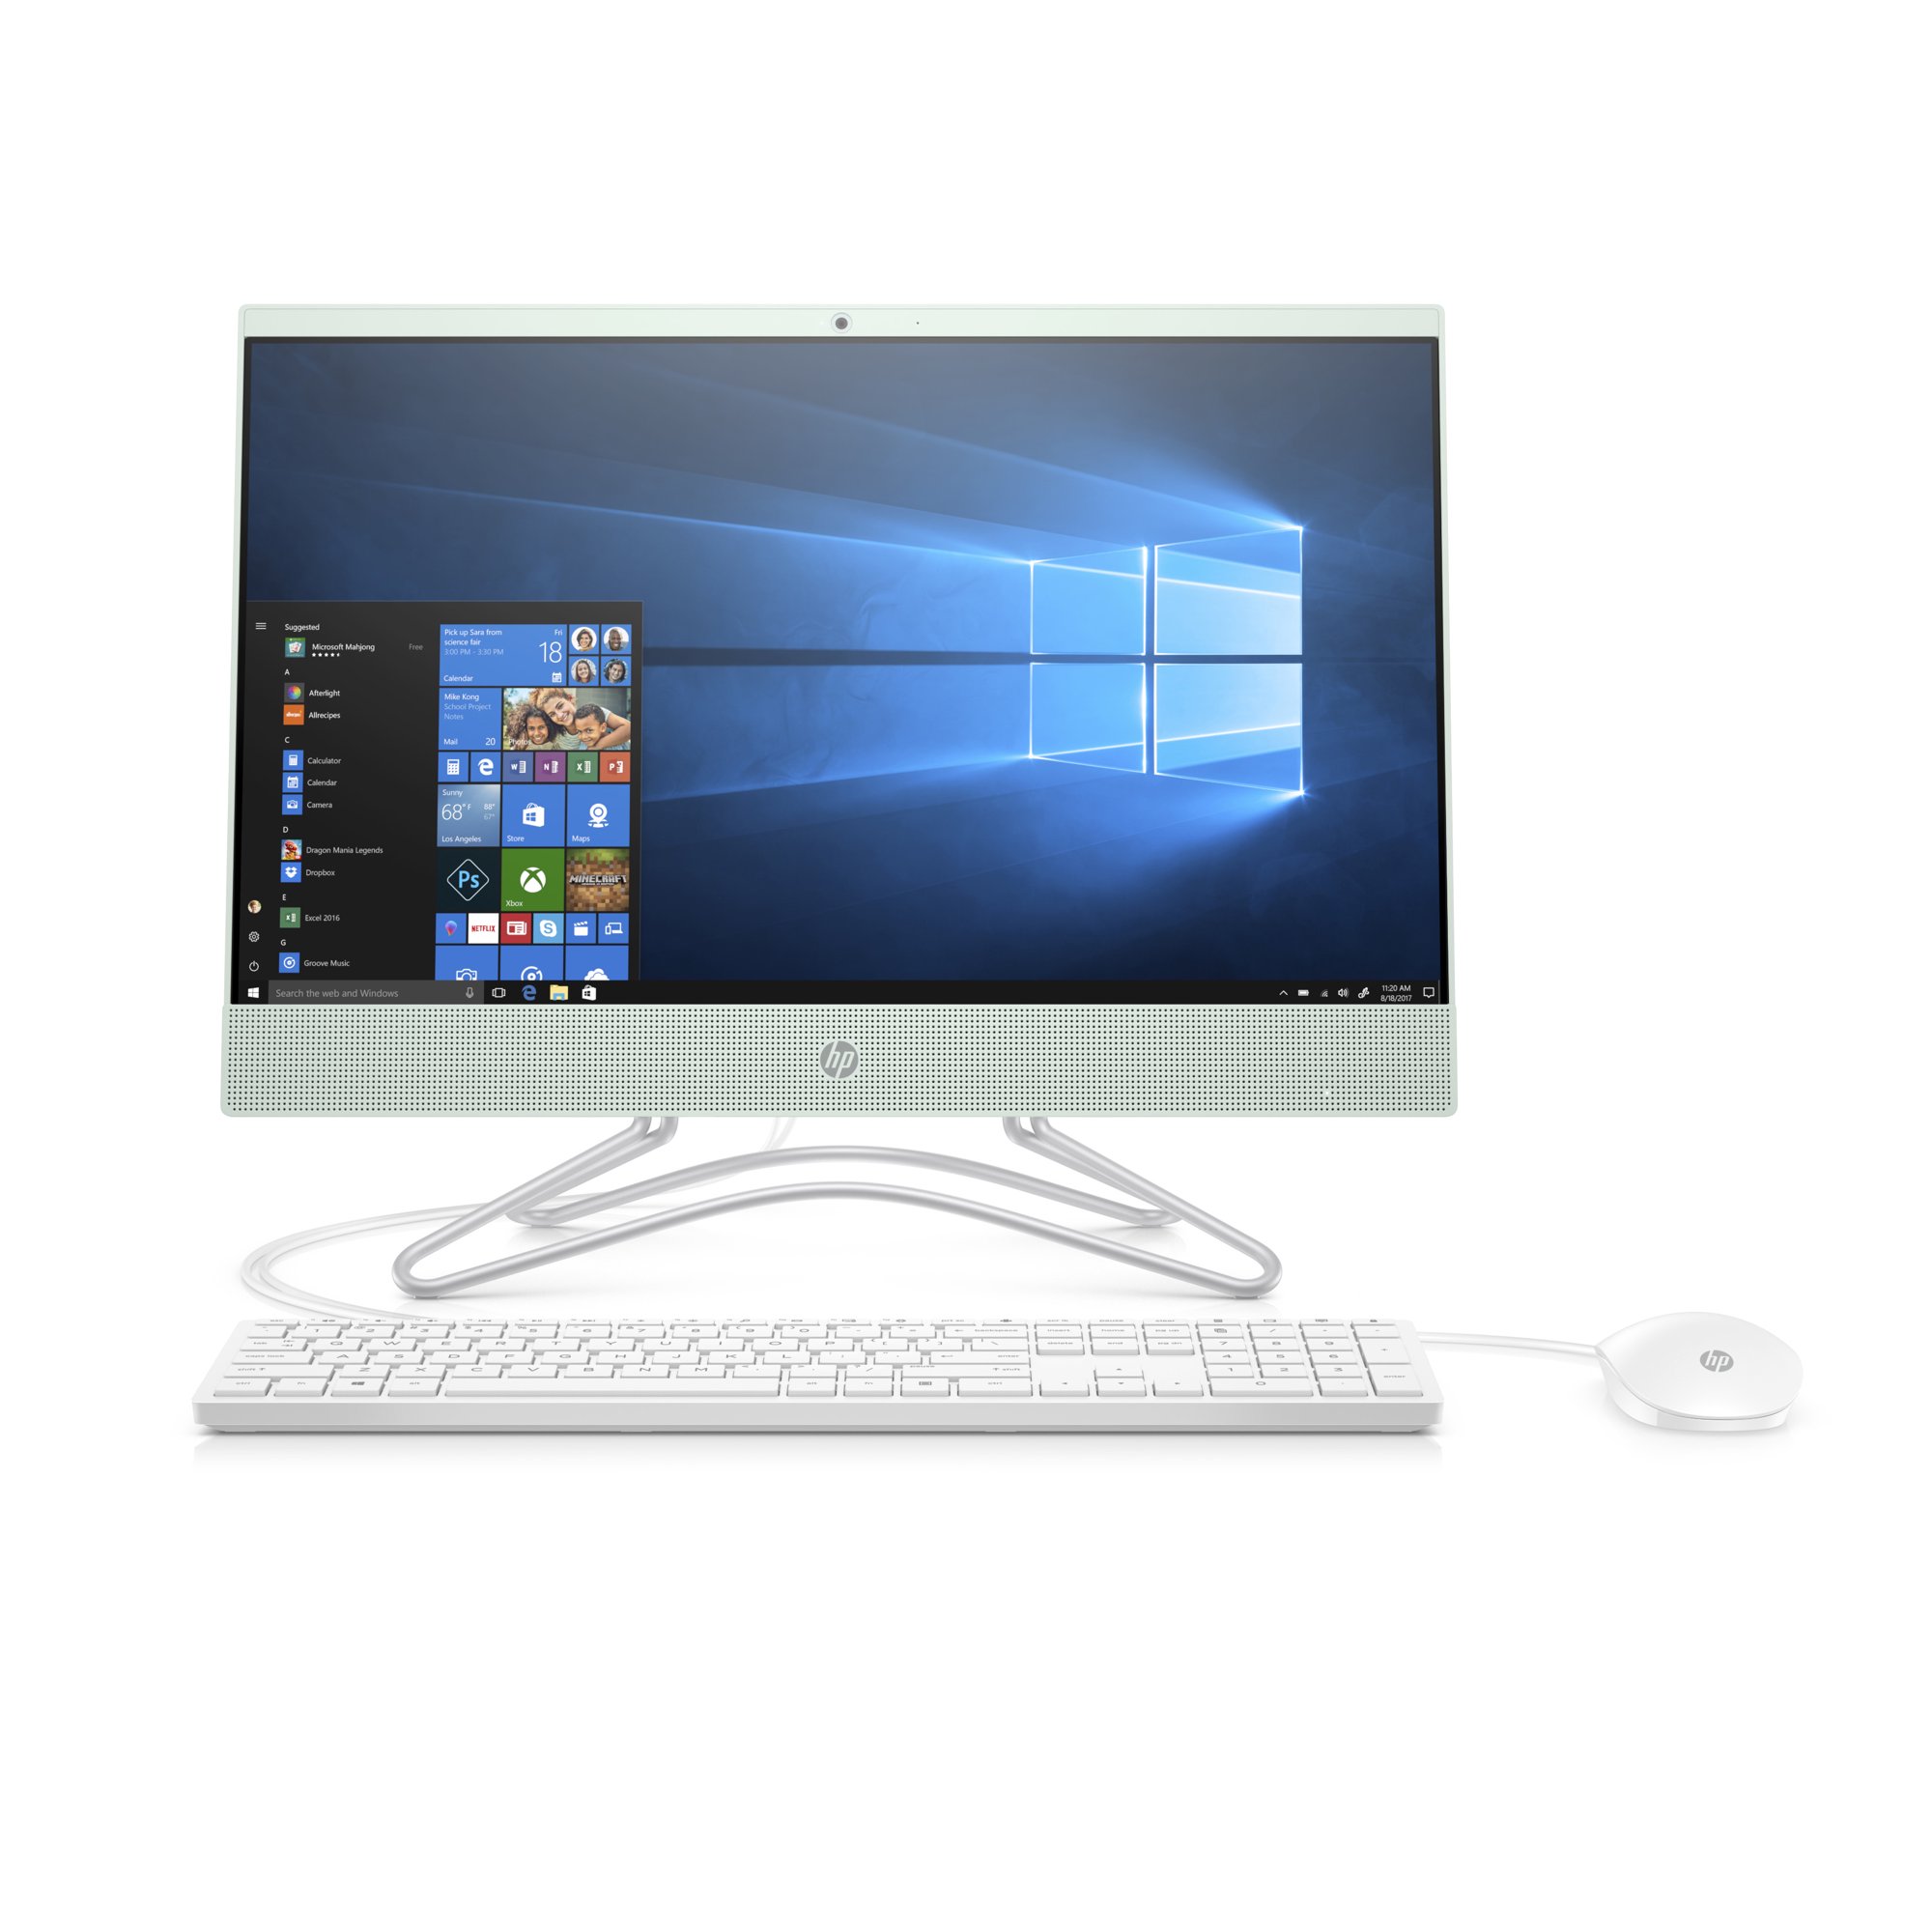 HP 22-c0073w All-in-One, 22" Display, Intel Celeron G4900T 2.9 GHz, 4GB RAM, 1TB HDD, Mint Color - image 1 of 5